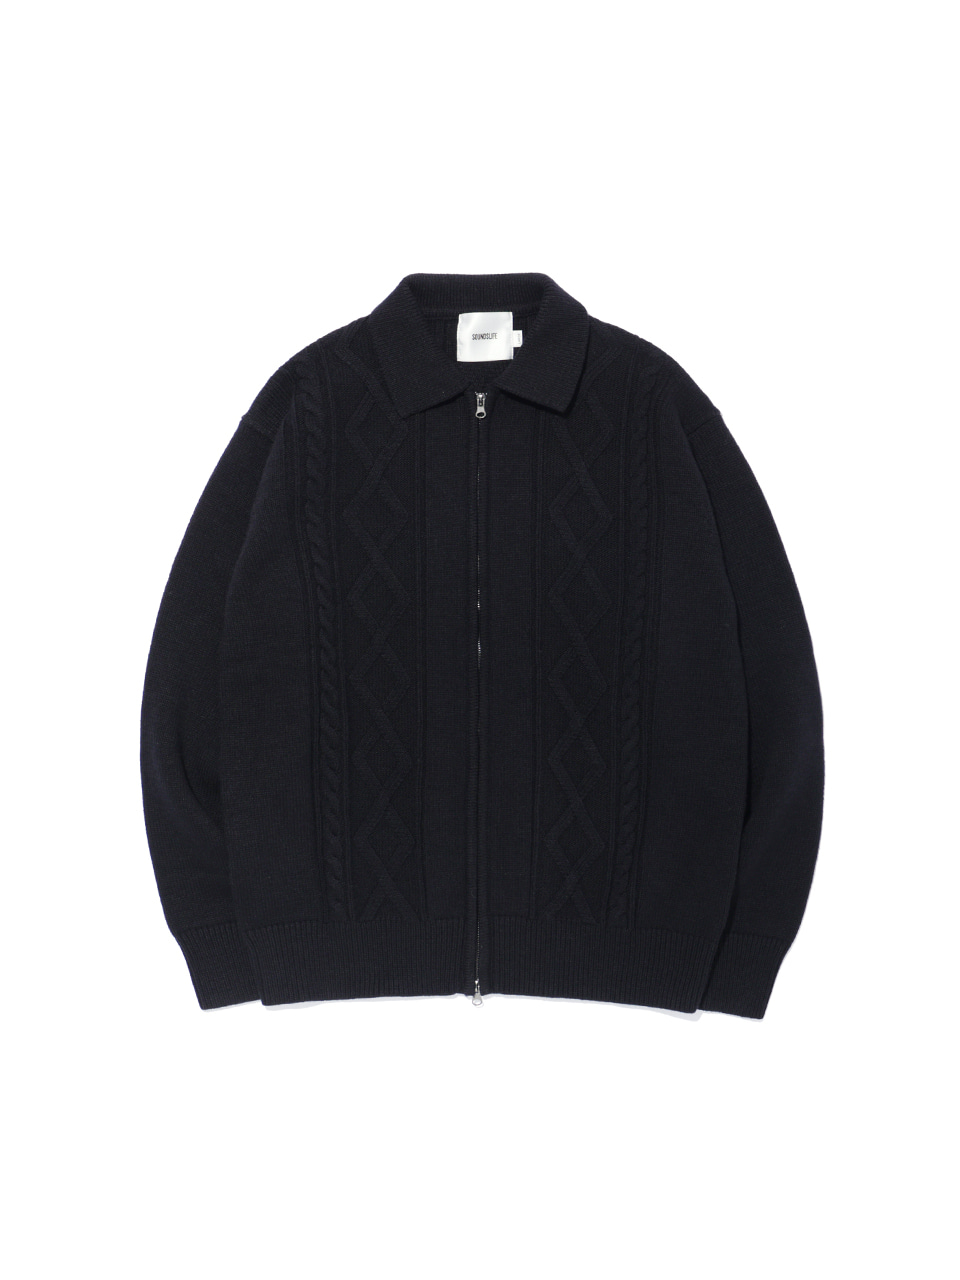 SOUNDSLIFE - ZIGZAG Cable Collar Knit Zip-Up Black